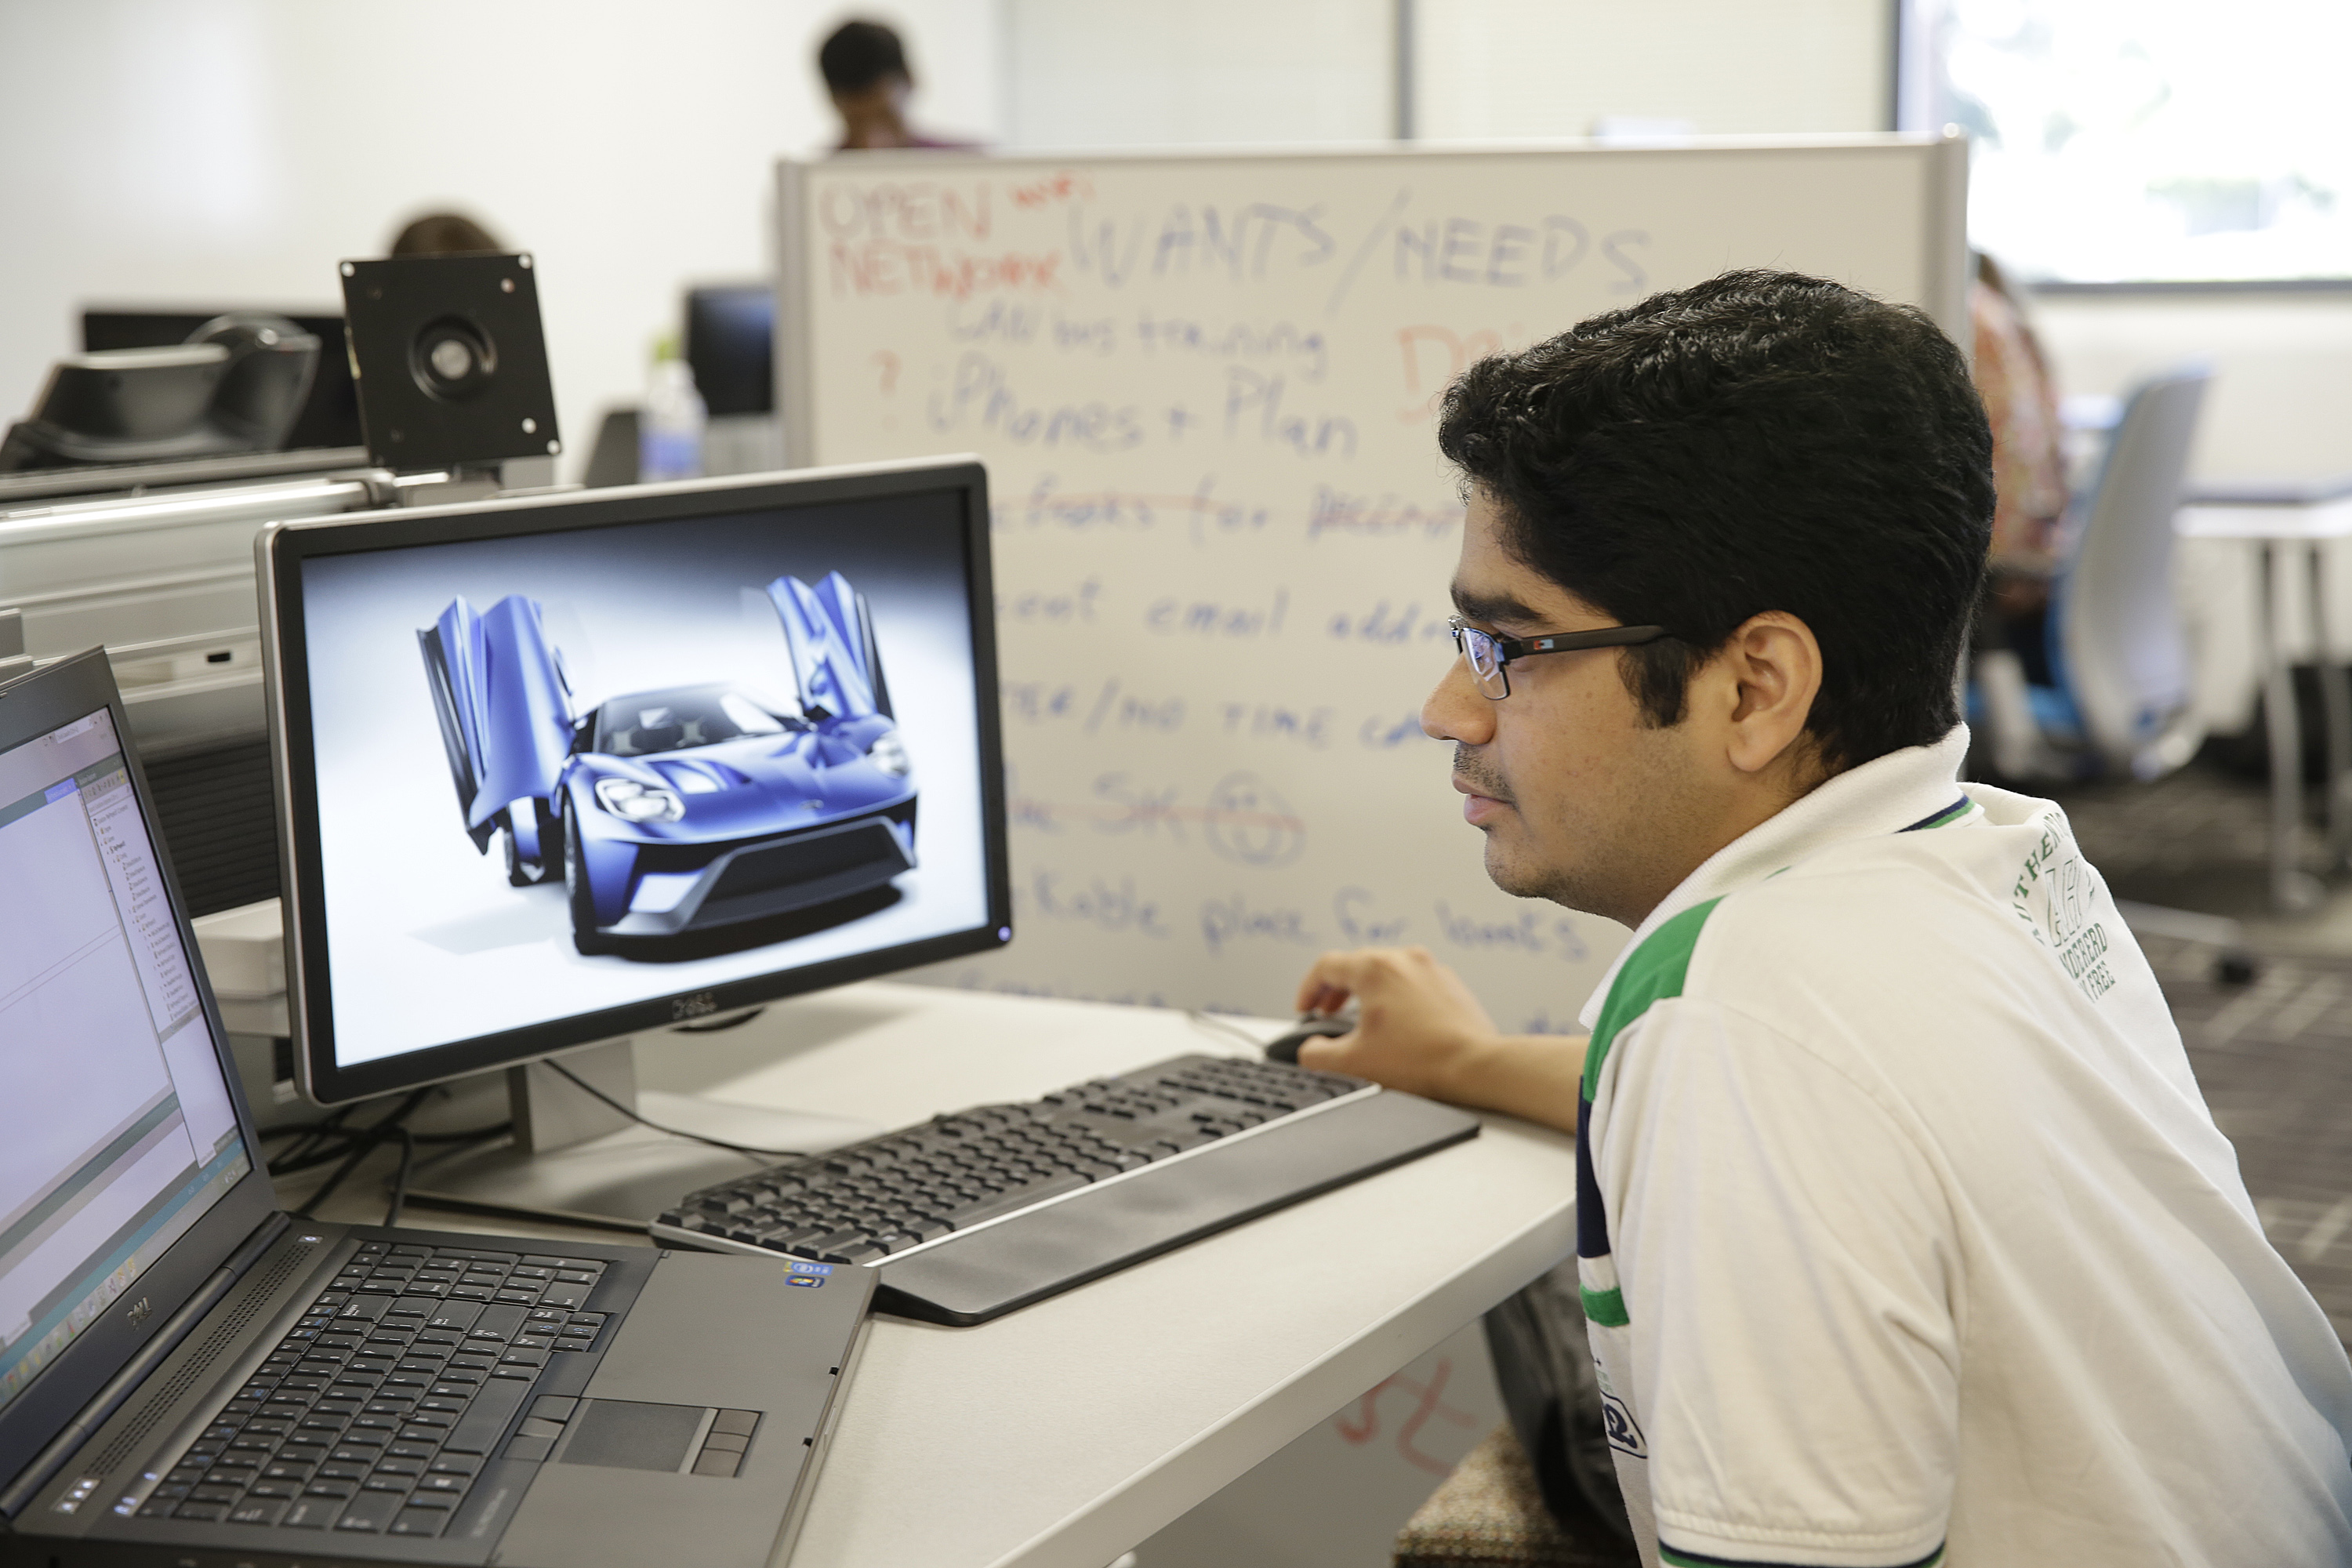 In this photo taken Thursday, Aug. 13, 2015, a research engineer works on image processing at the Ford Motor Company Research and Innovation Center in Palo Alto, Calif. The convergence of cars and technology is blurring the traditional geographical boundaries of both industries. Silicon Valley is dotted with research labs opened by automakers and suppliers, who are racing to develop high-tech infotainment systems and autonomous cars. (AP Photo/Eric Risberg)